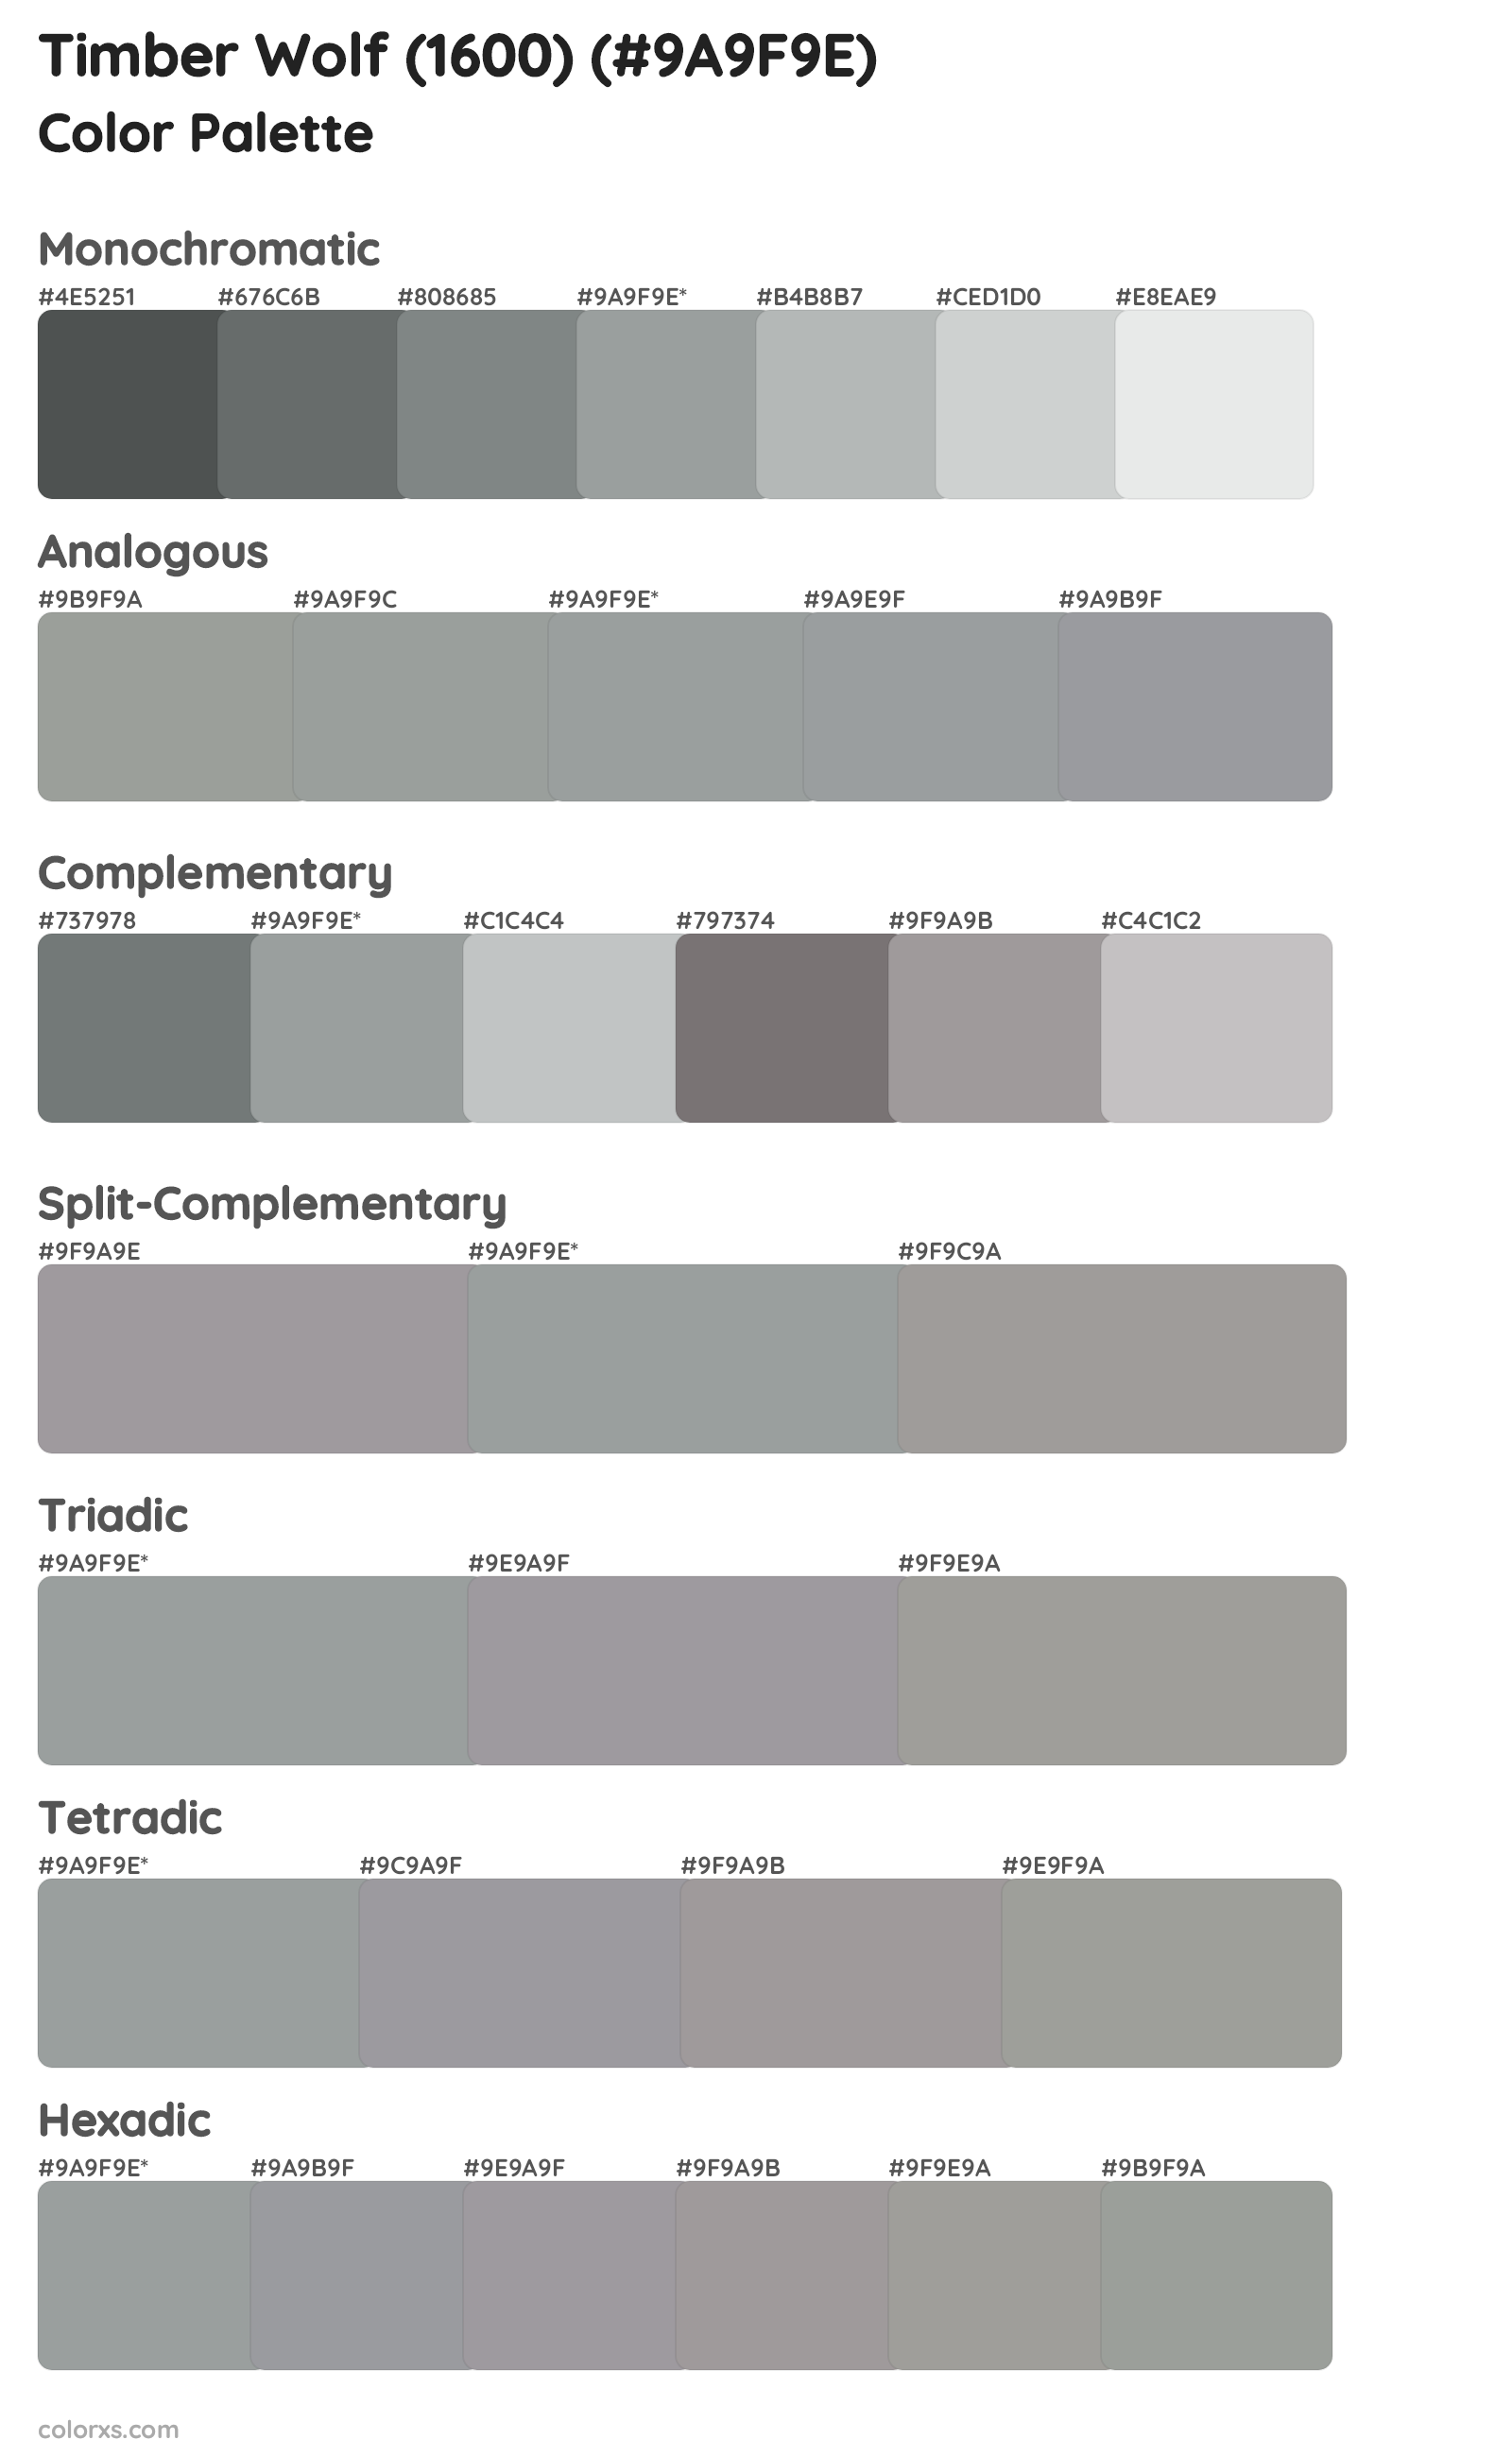 Timber Wolf (1600) Color Scheme Palettes